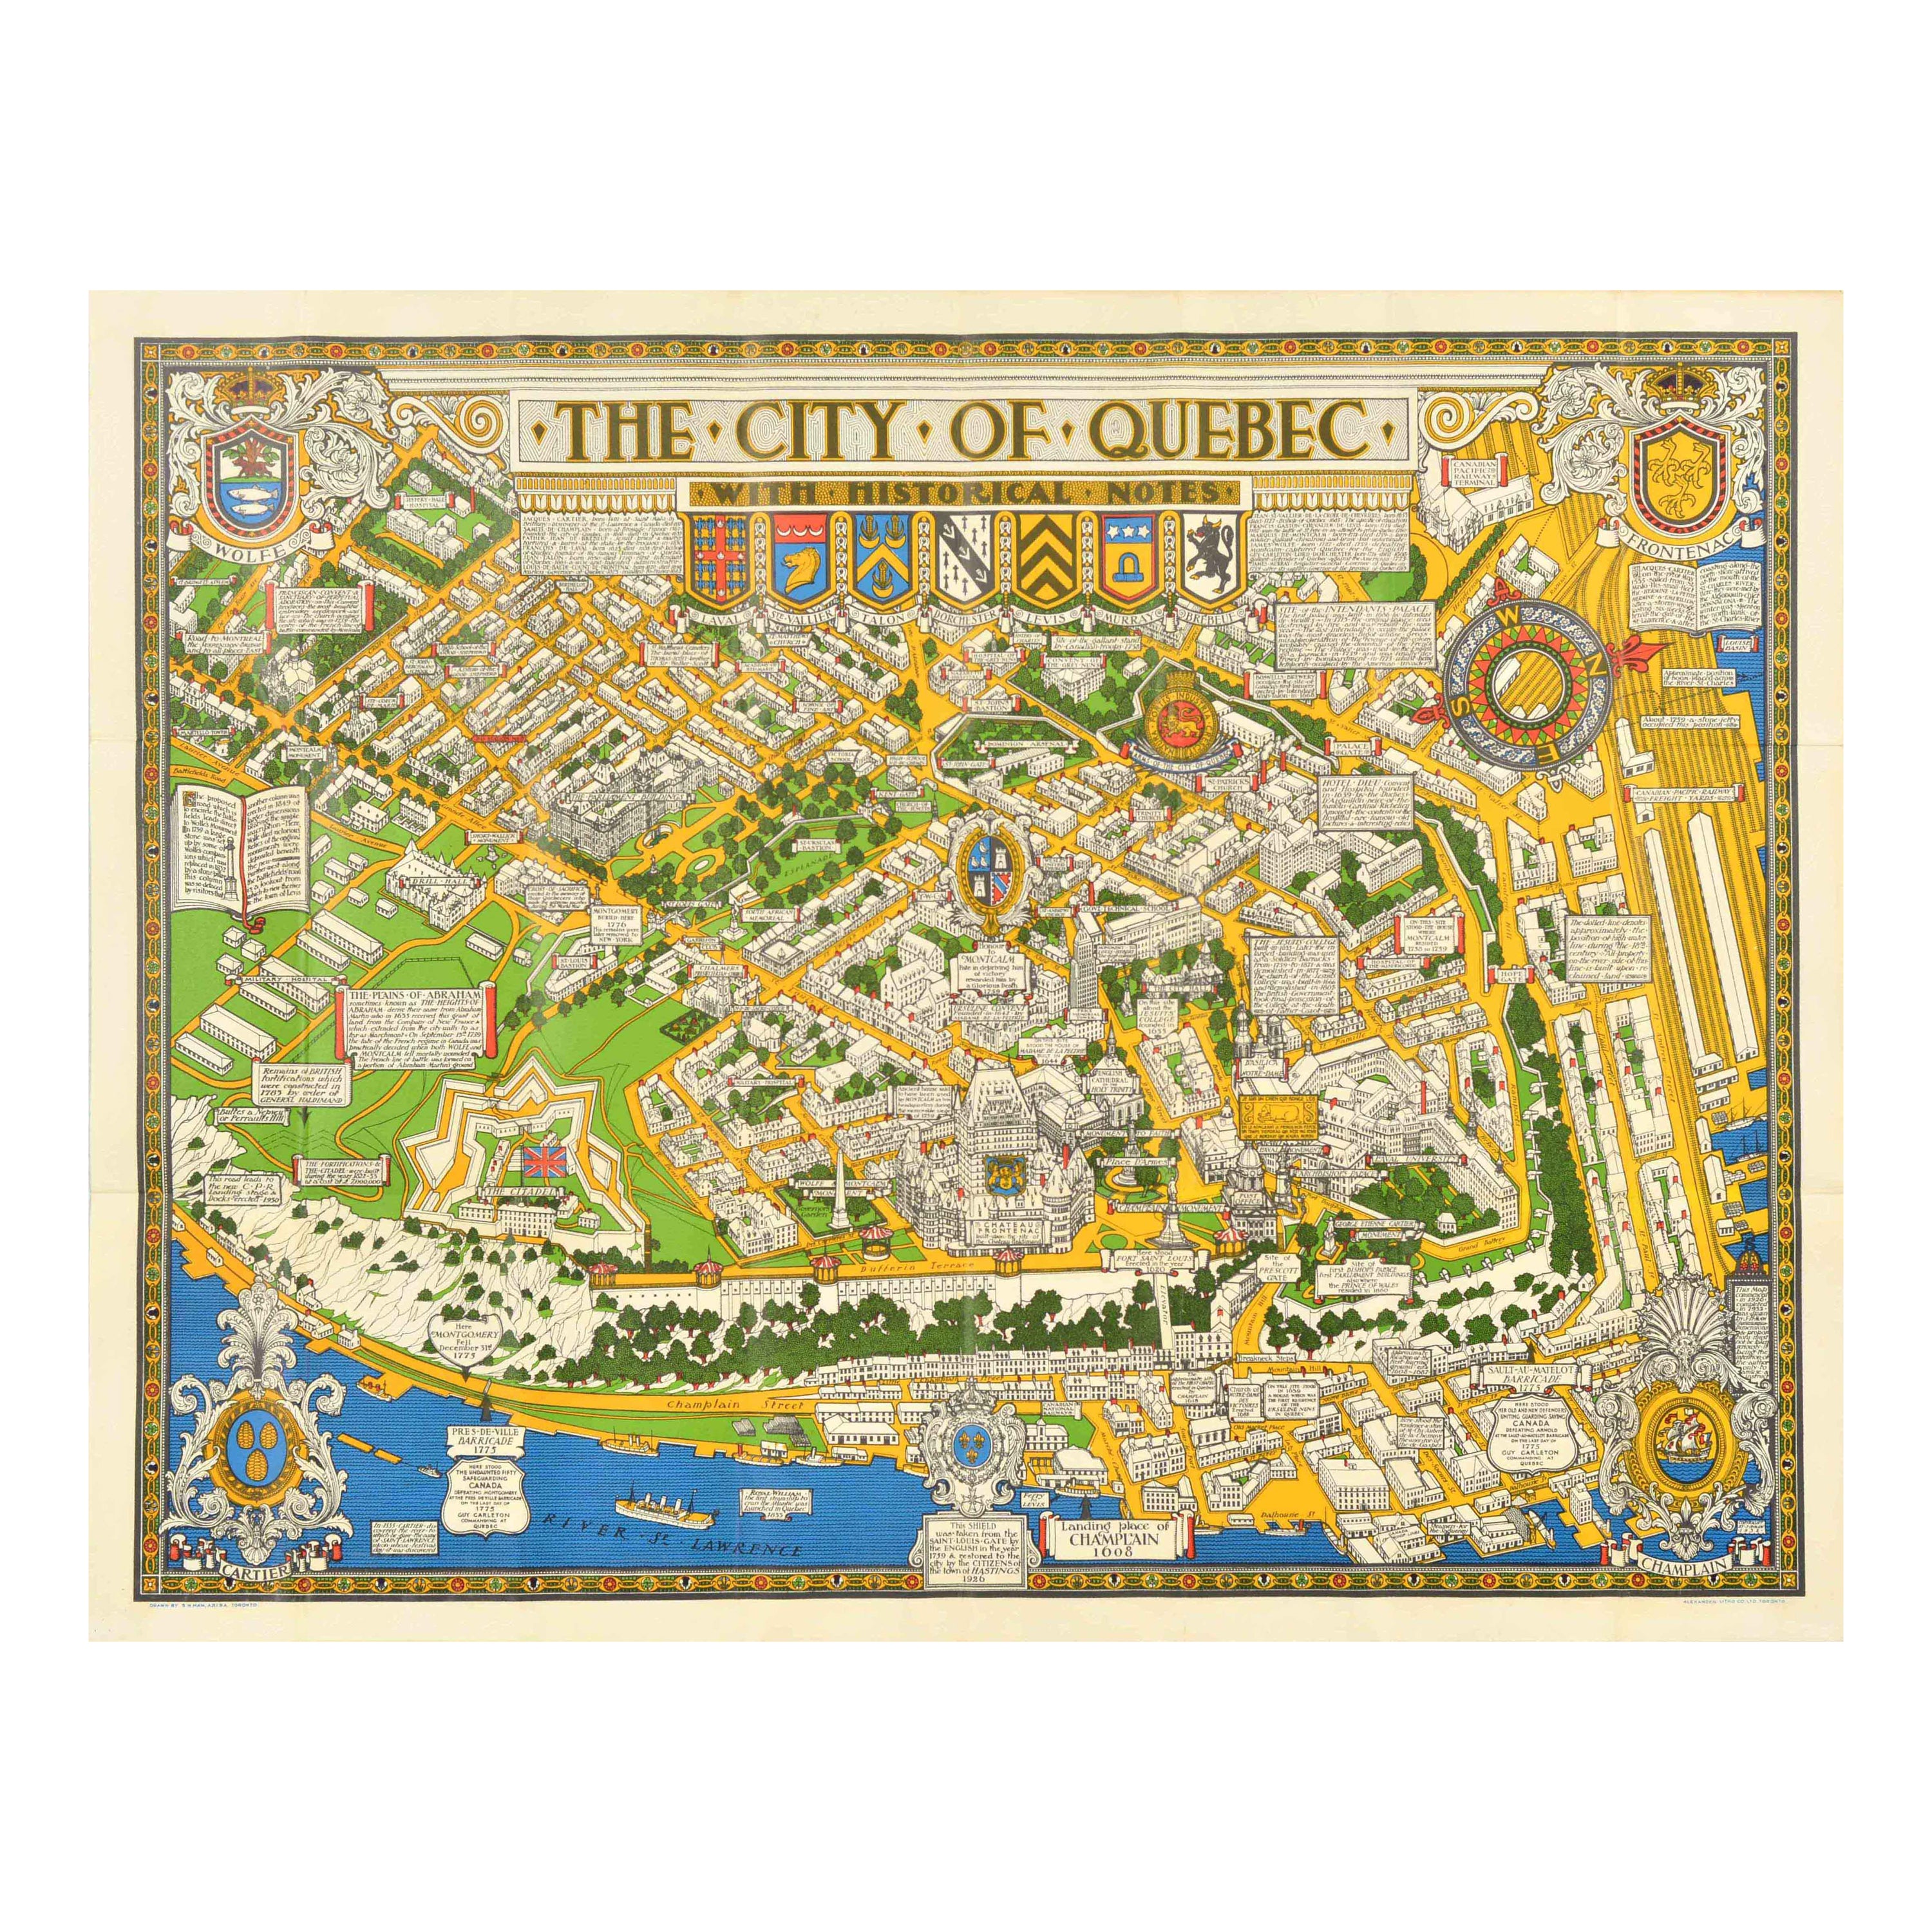 Original Vintage Travel Poster Quebec Map With Historical Notes Canada Pictorial For Sale